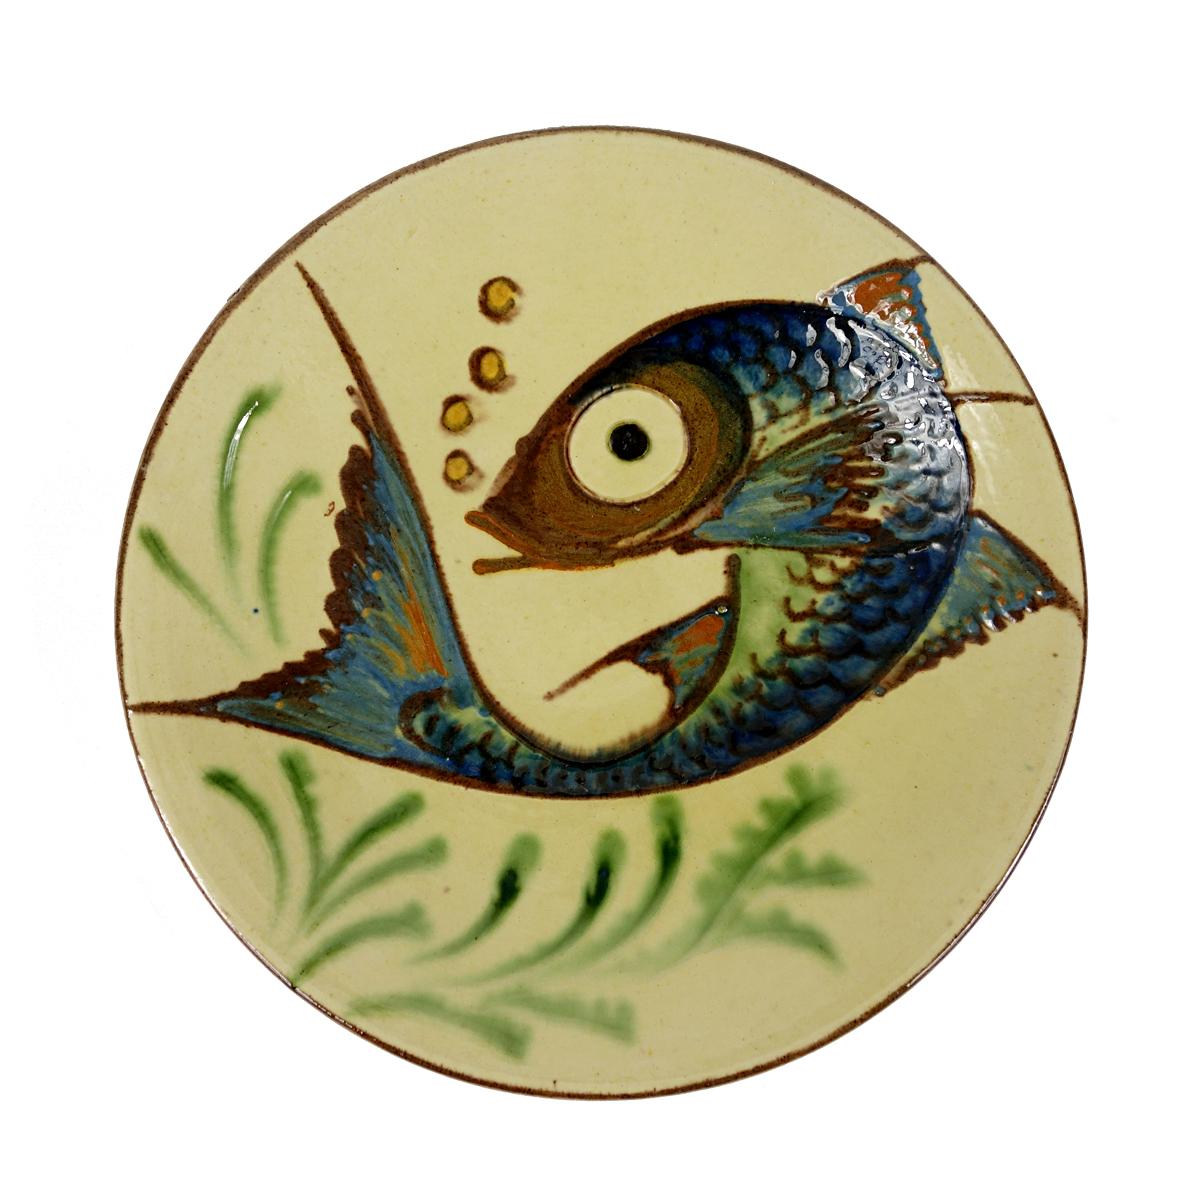 Very colorful and decorative wall plates with stylized fishes.
Designed and made by Puigdemont of Spain.
The plates have diameters of 19 (7.5 inch) and 24.5 cm (9.65 inch).